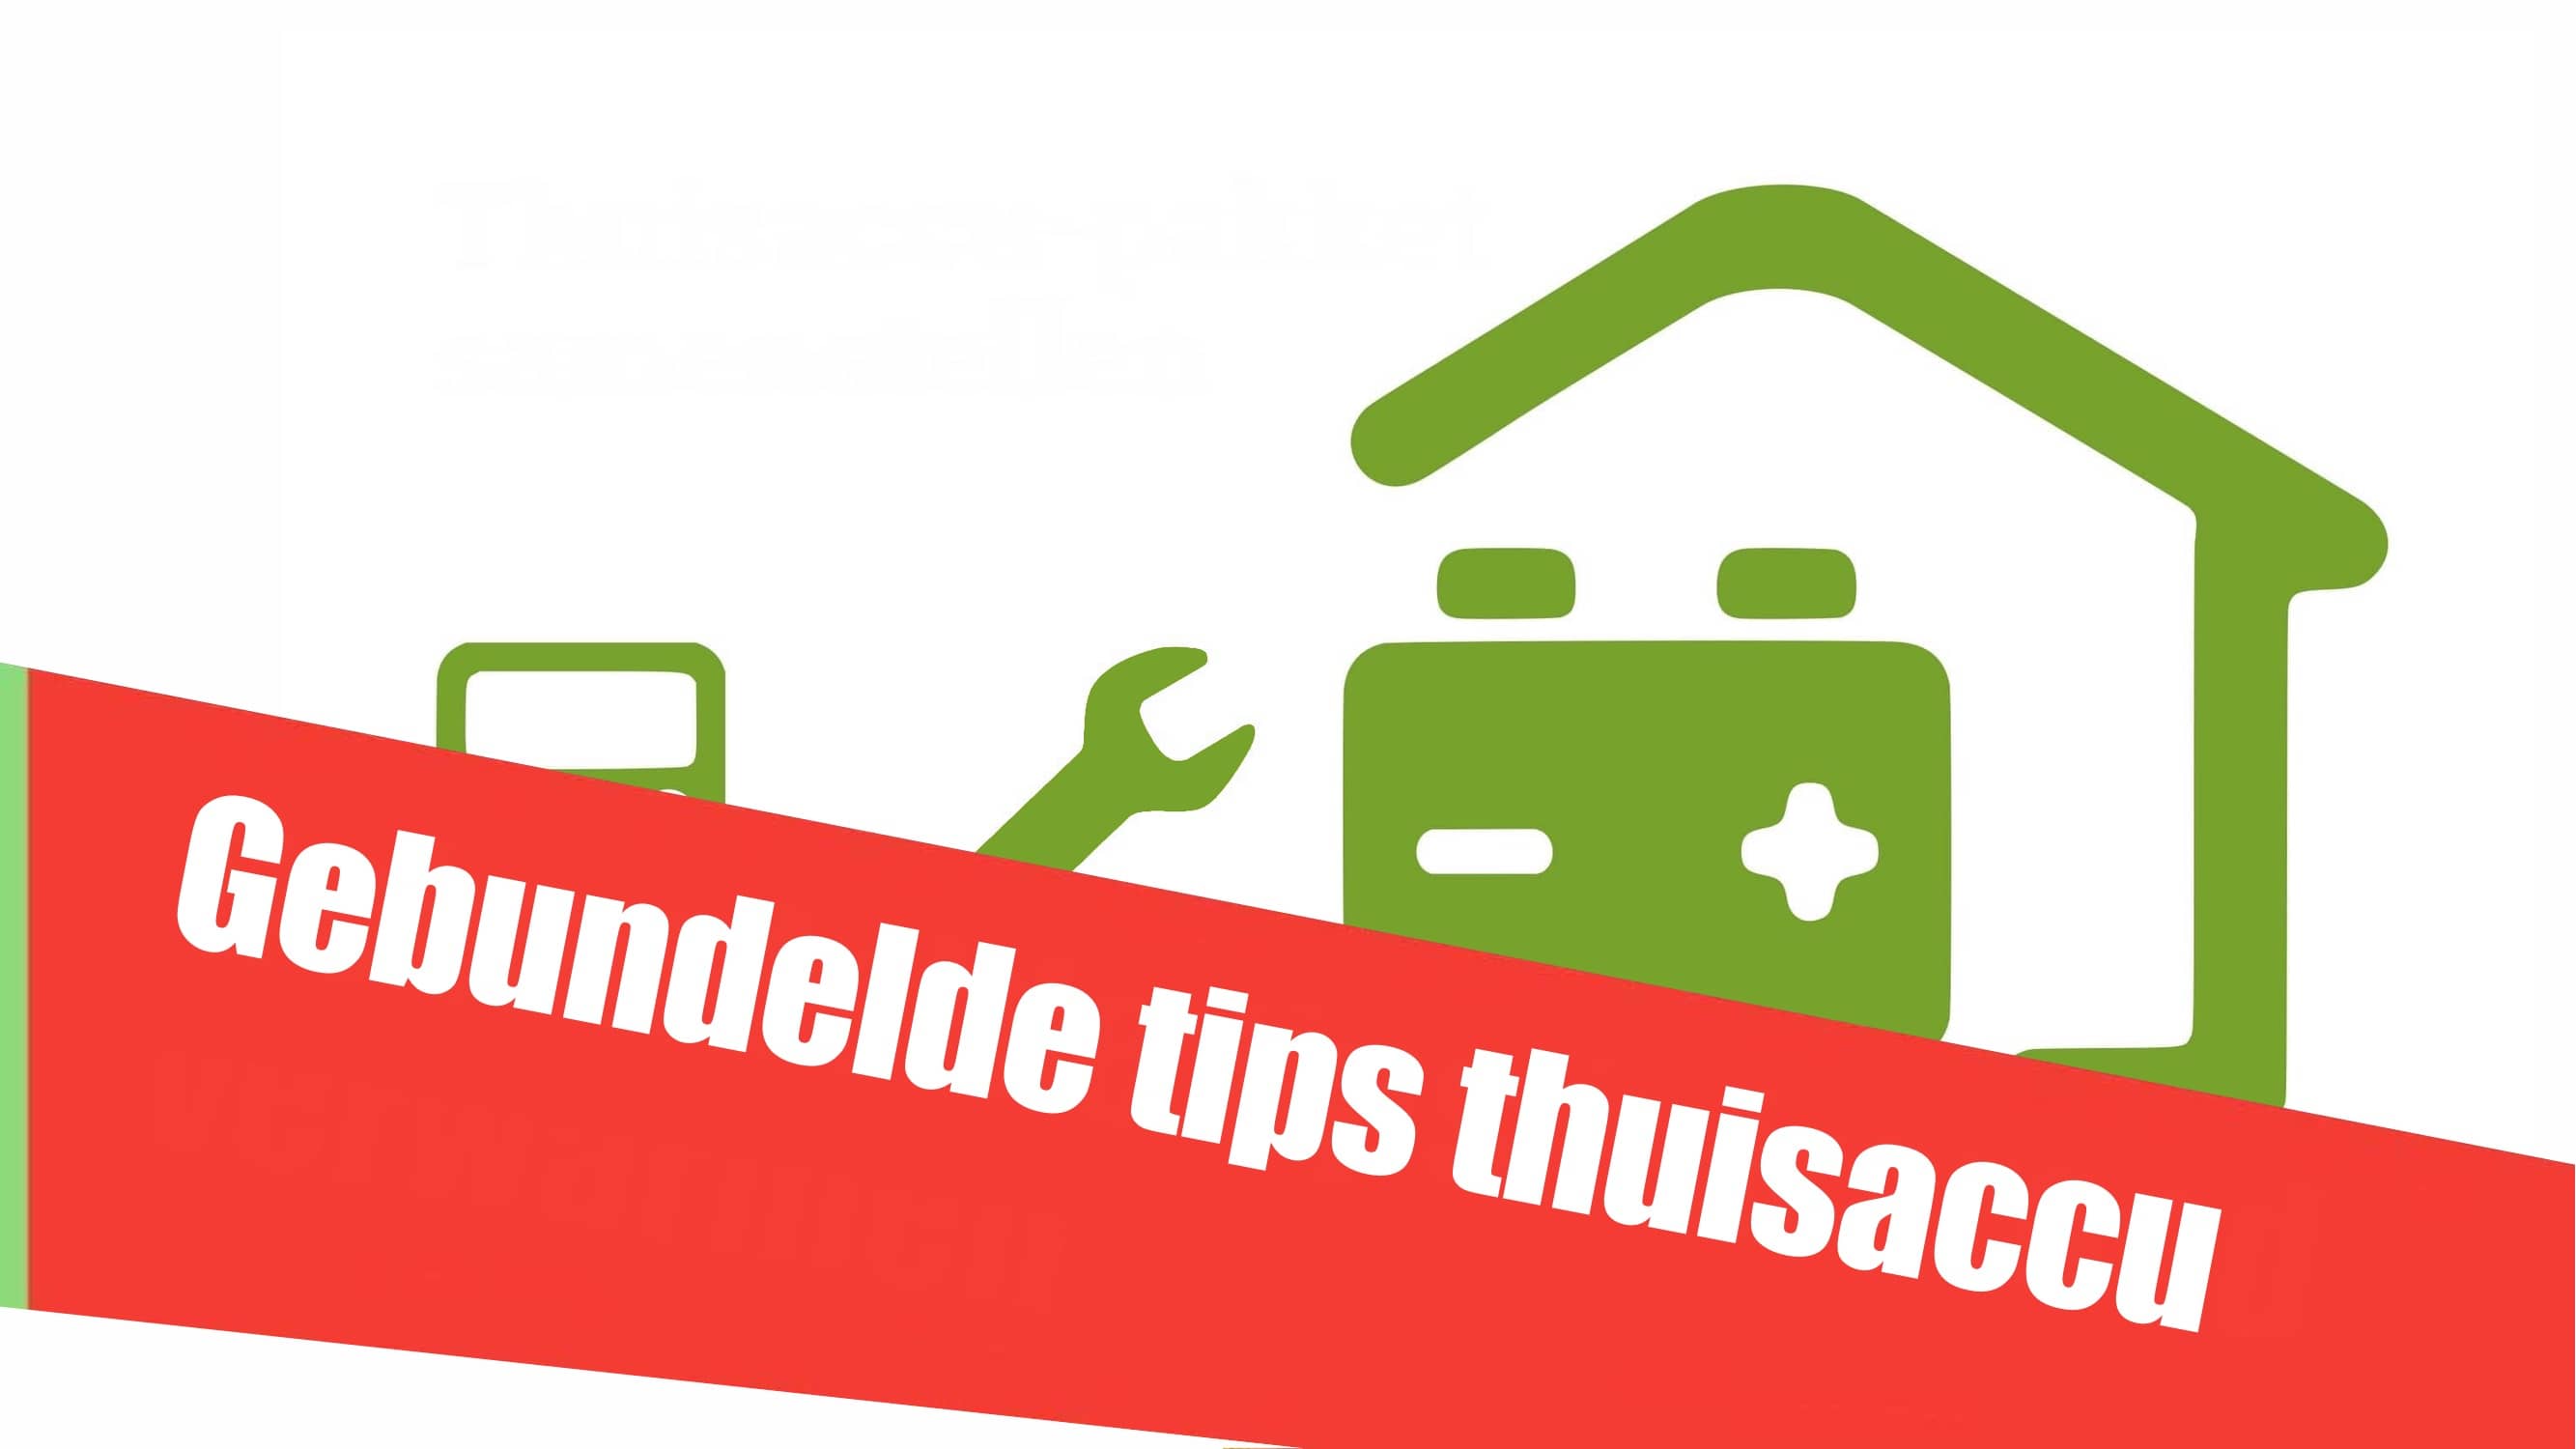 Thuisaccu tips download